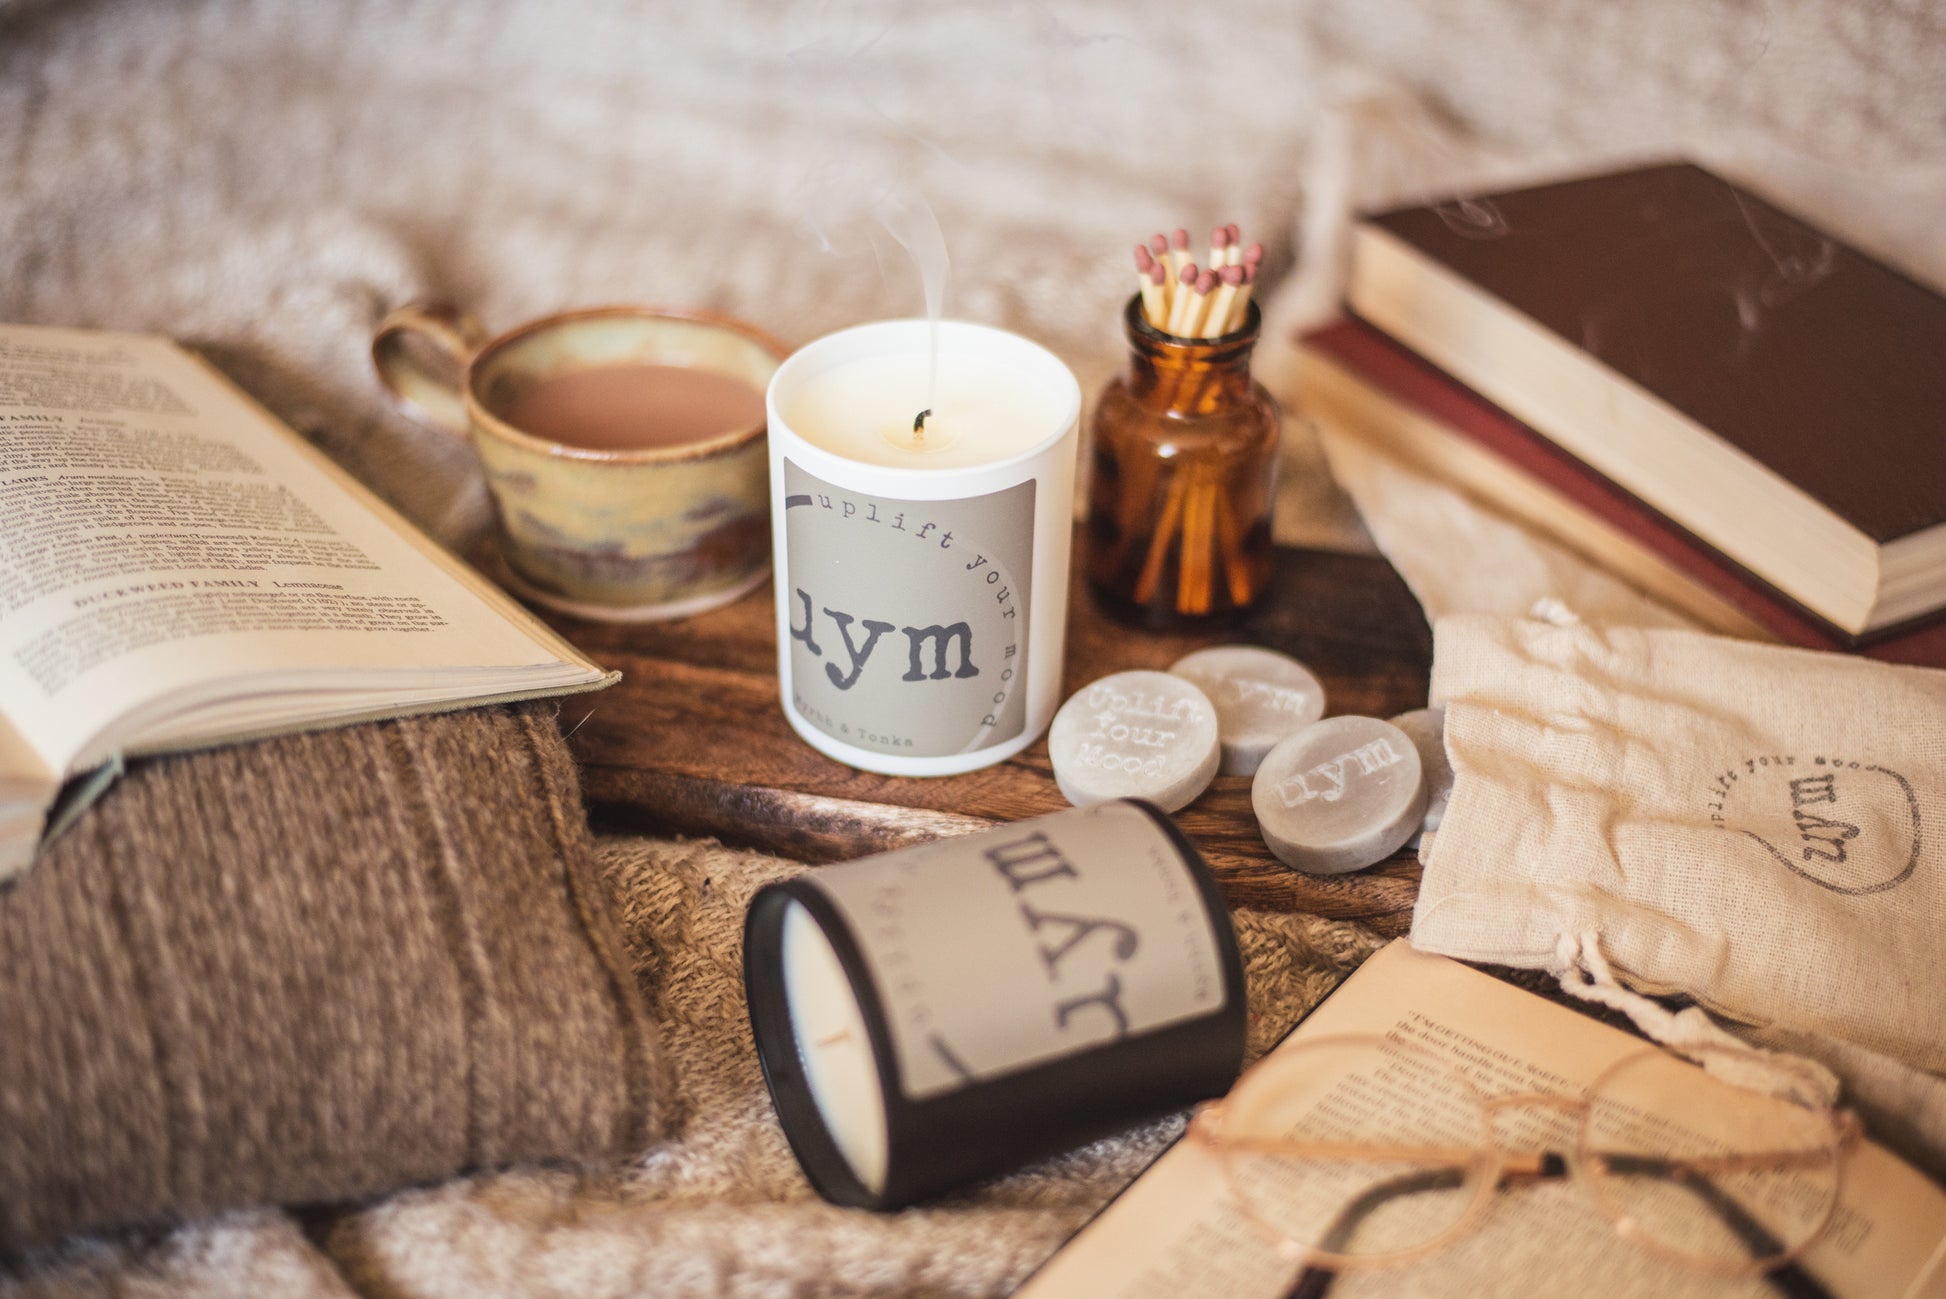 Myrrh & Tonka Candle, natural wax, matt white glass jar, matt black glass jar, natural wax melts in a lovey cotton bag, cosy atmosphere, Uplift Your Mood Scents